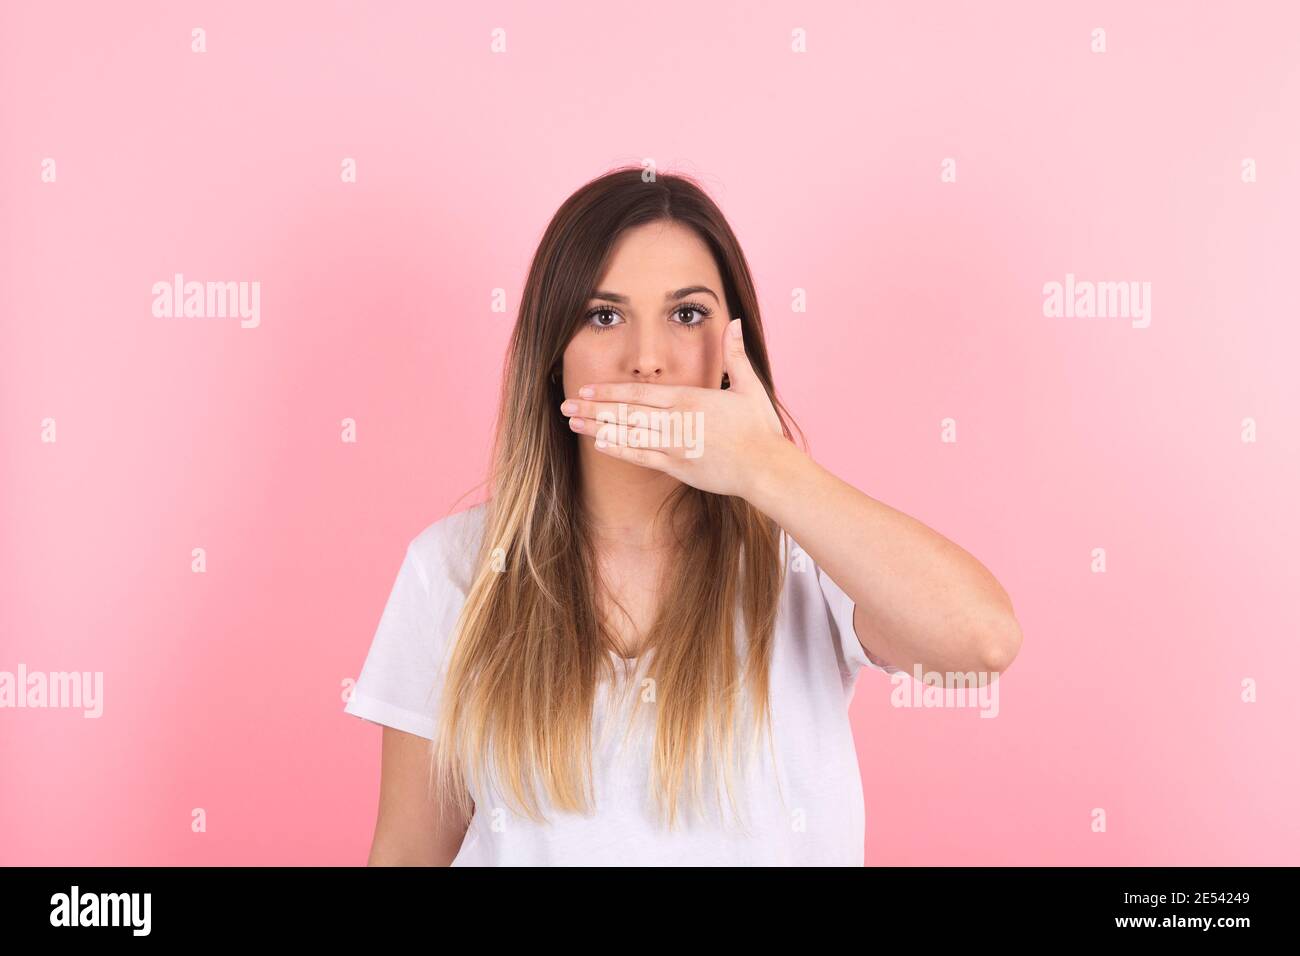 young woman covering her mouth with her hand with a serious gesture Stock Photo